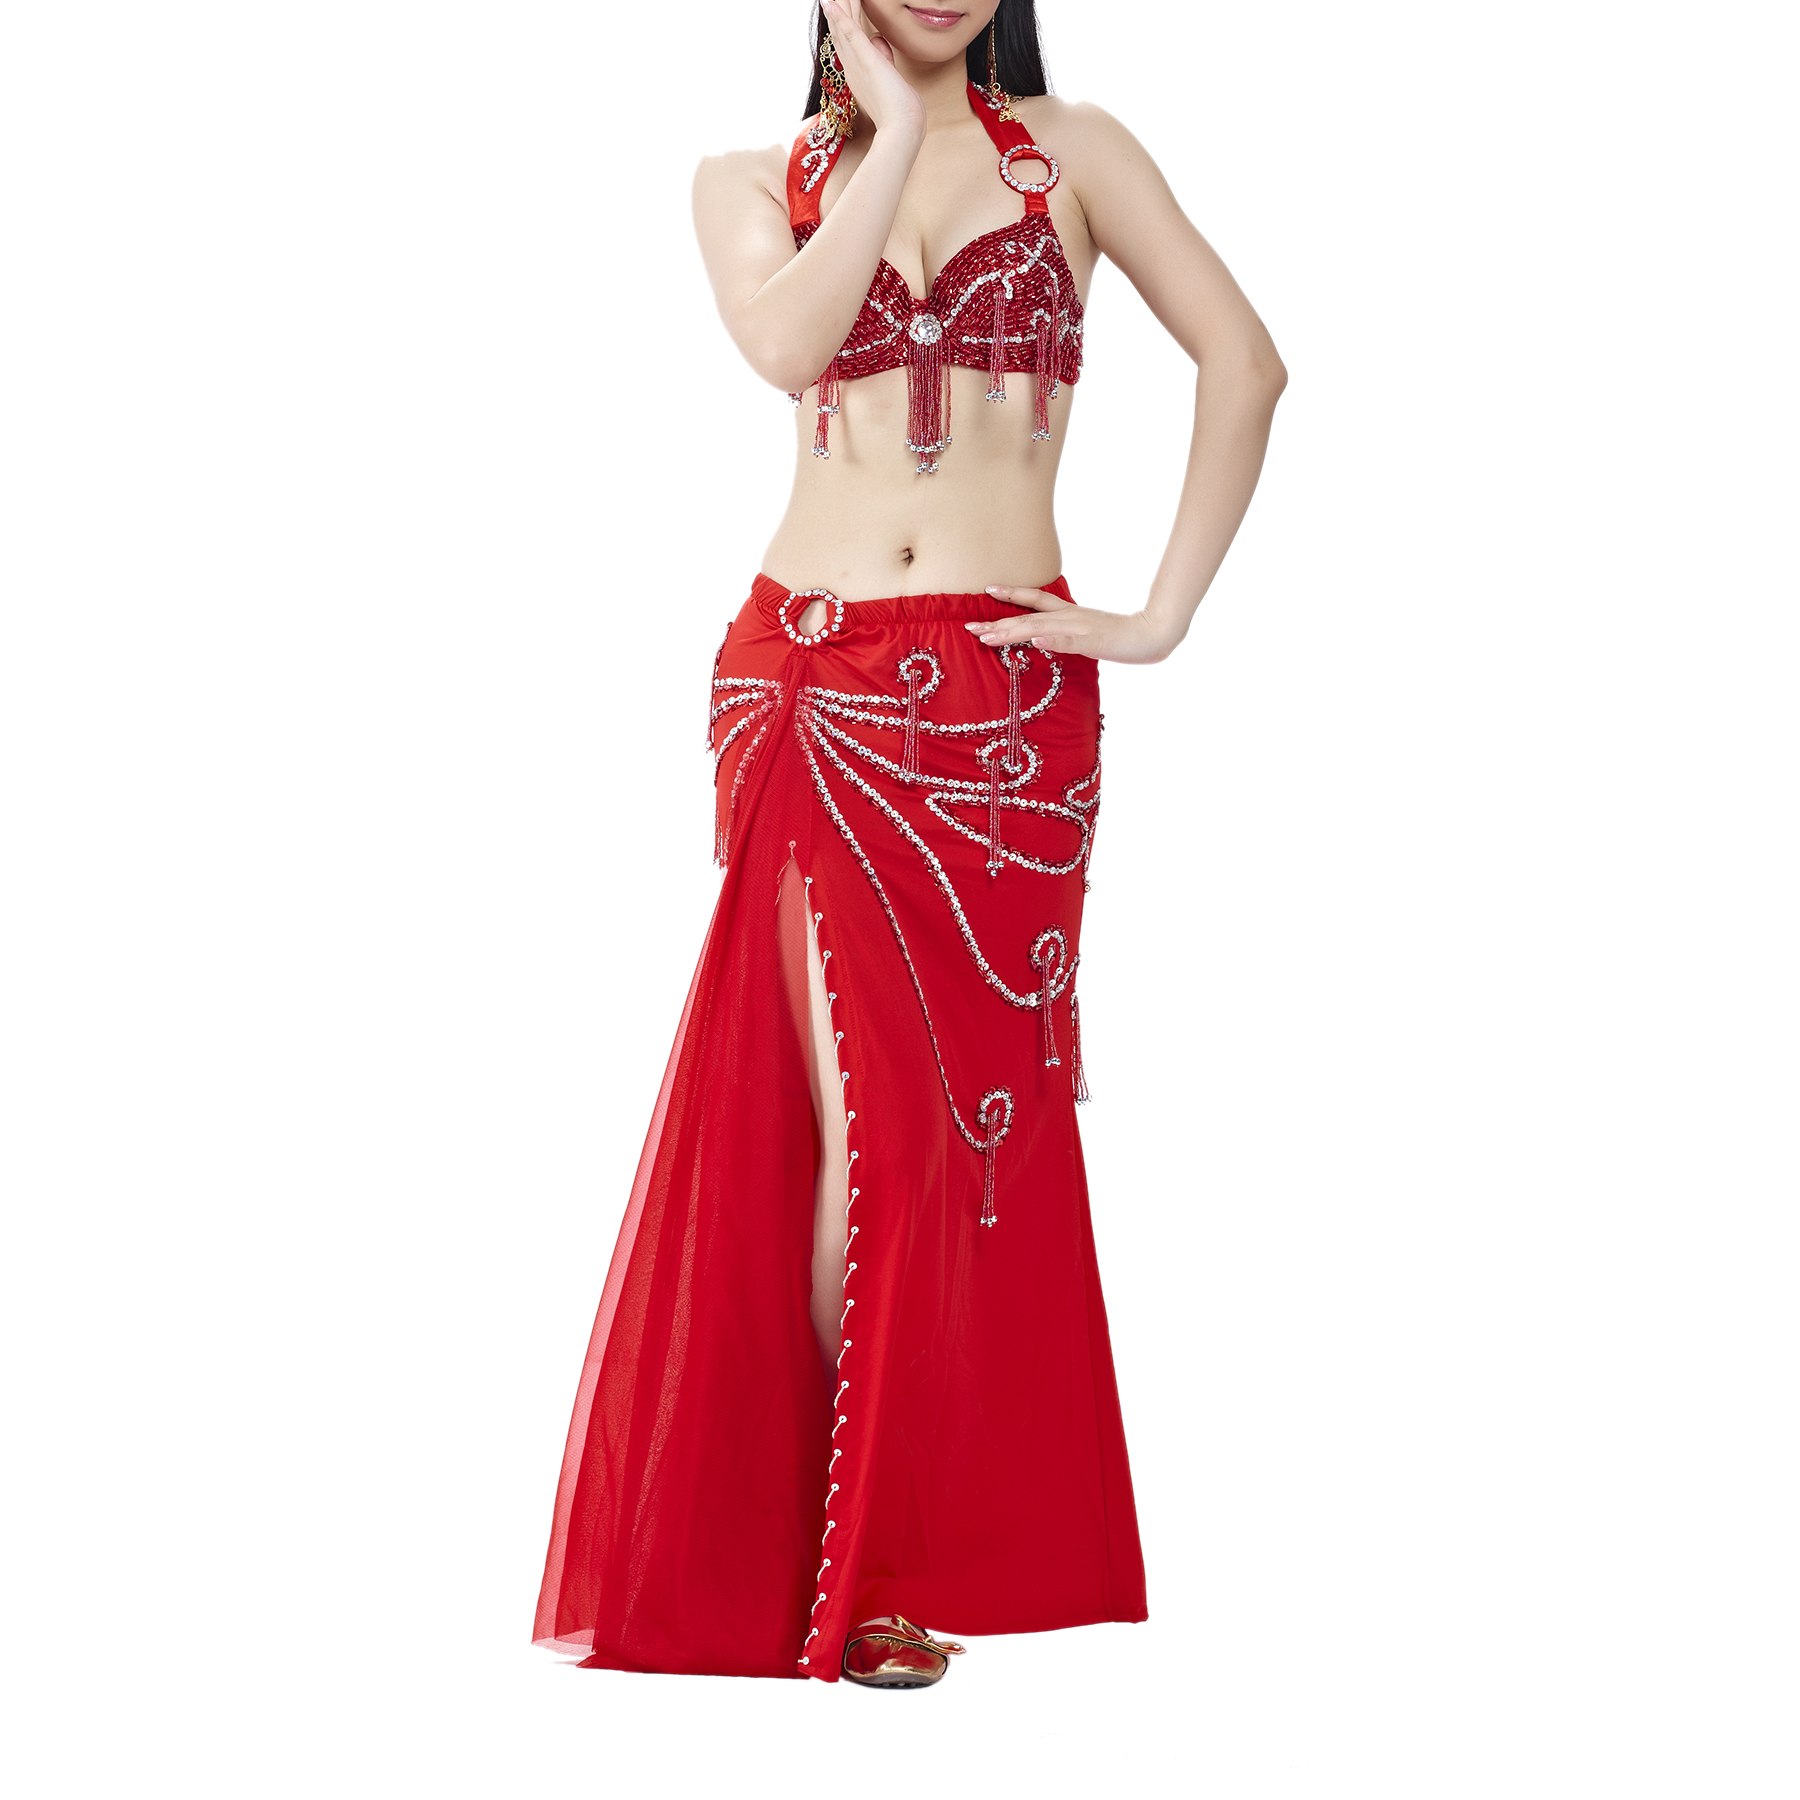 BellyLady Tribal Belly Dance Bra Top, Gypsy Halter Sequined